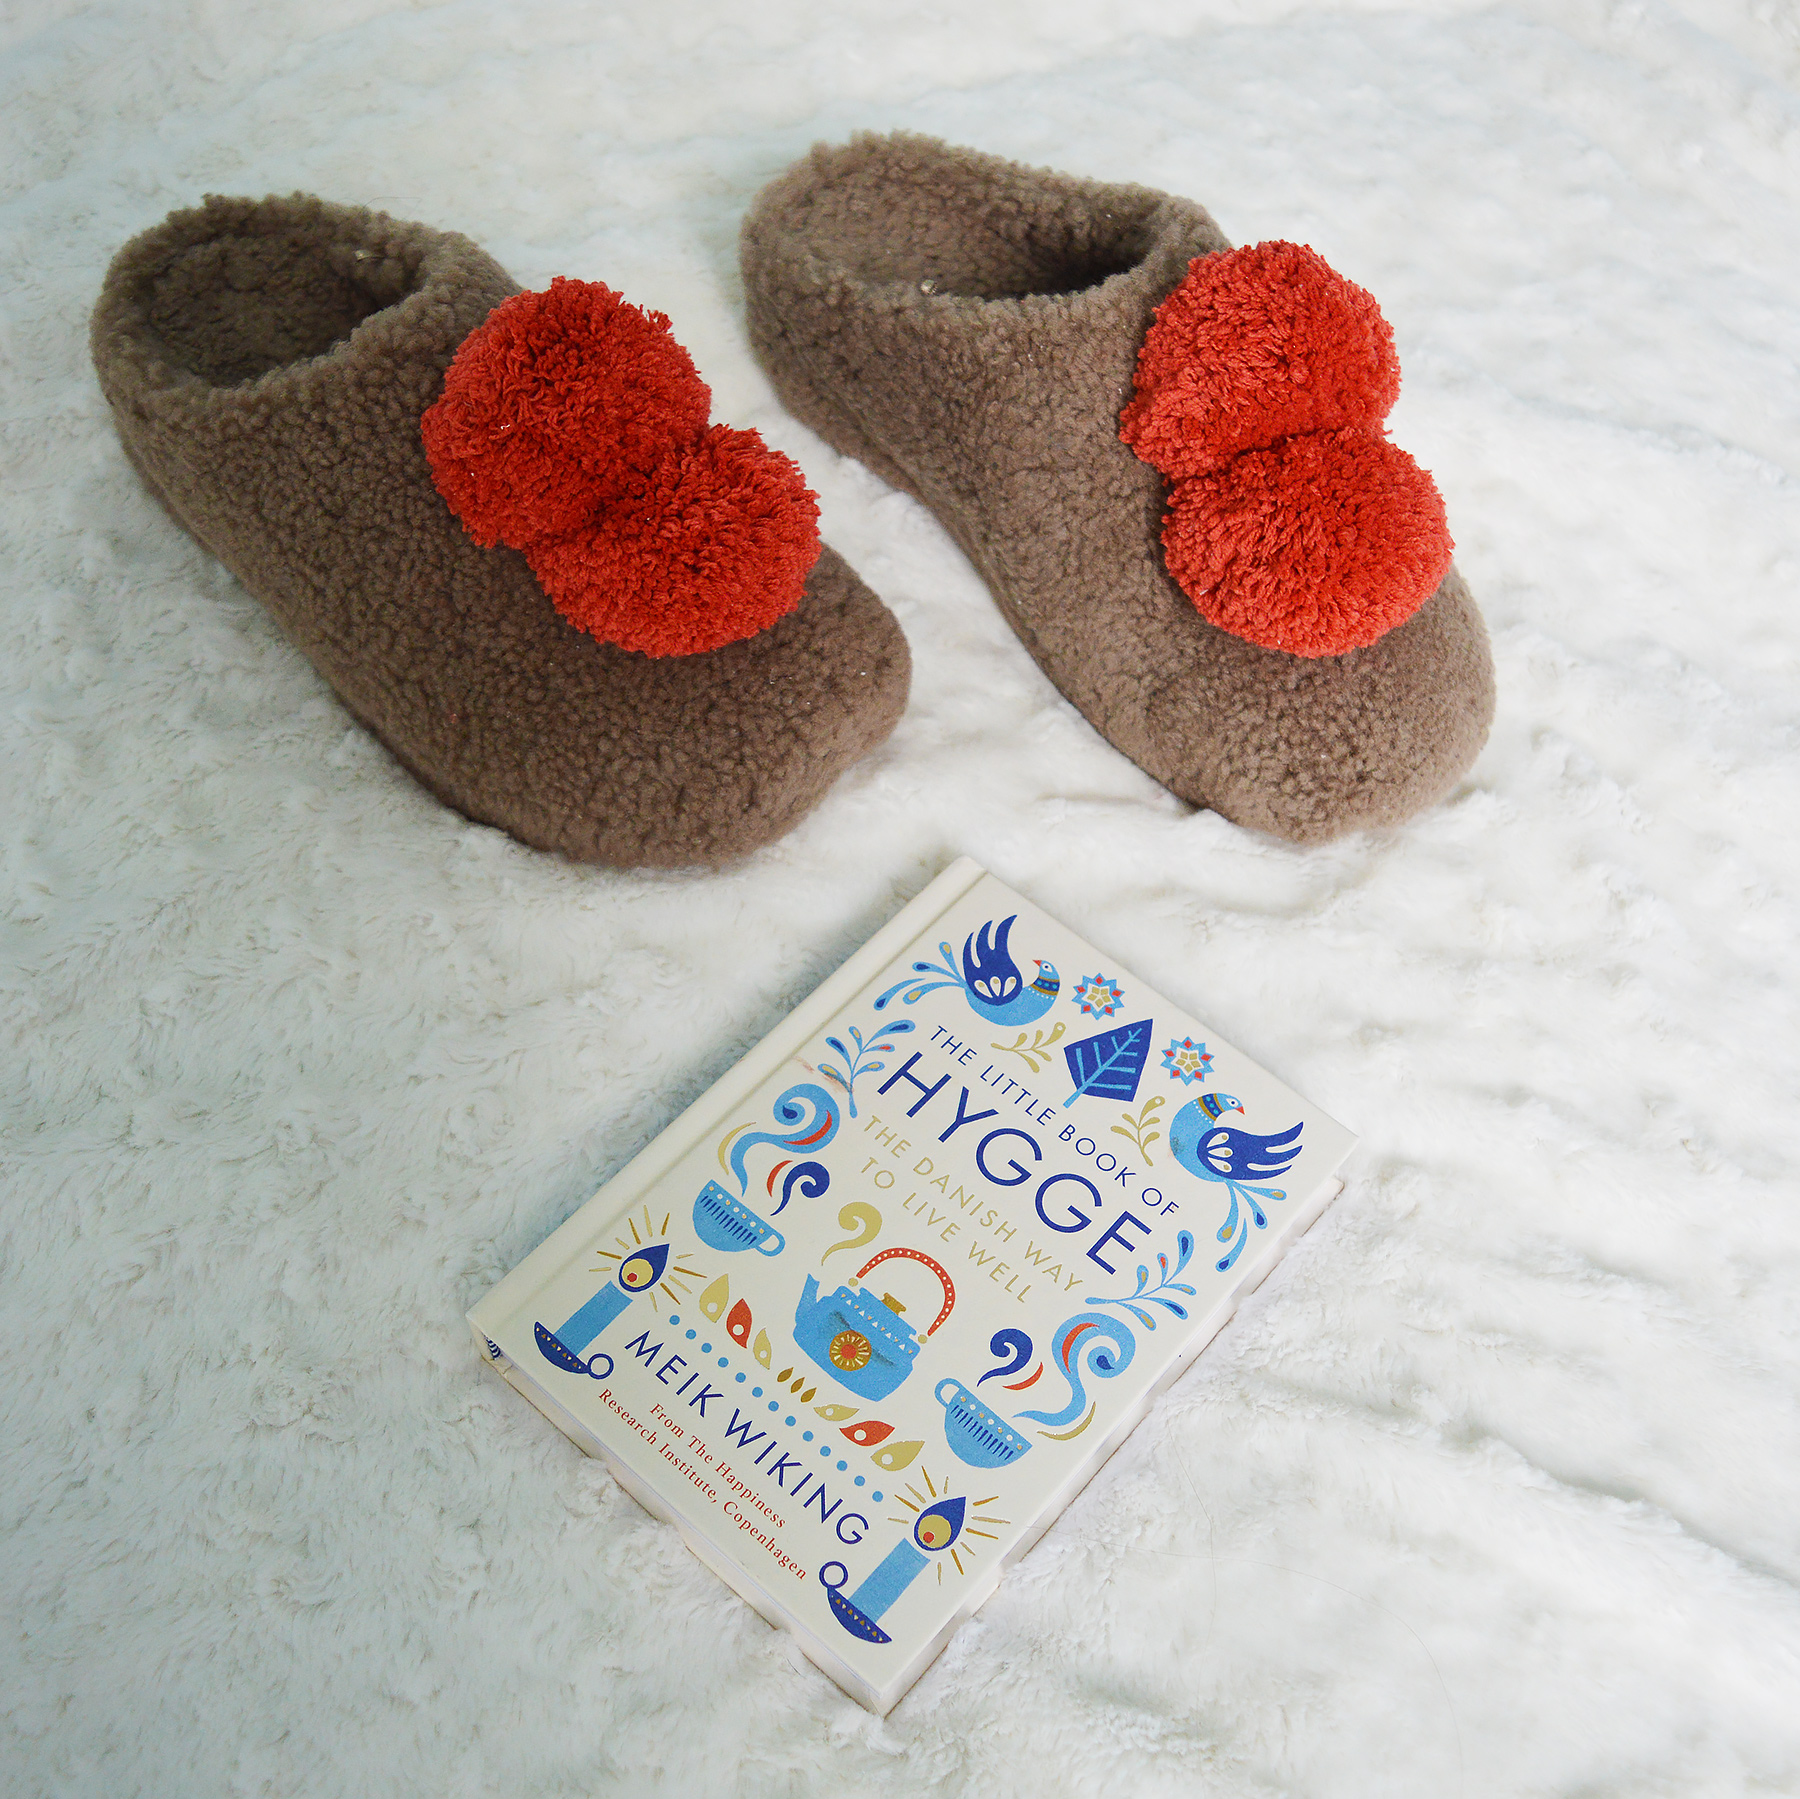 The Little Book Of HYGGE review and fitflop slippers